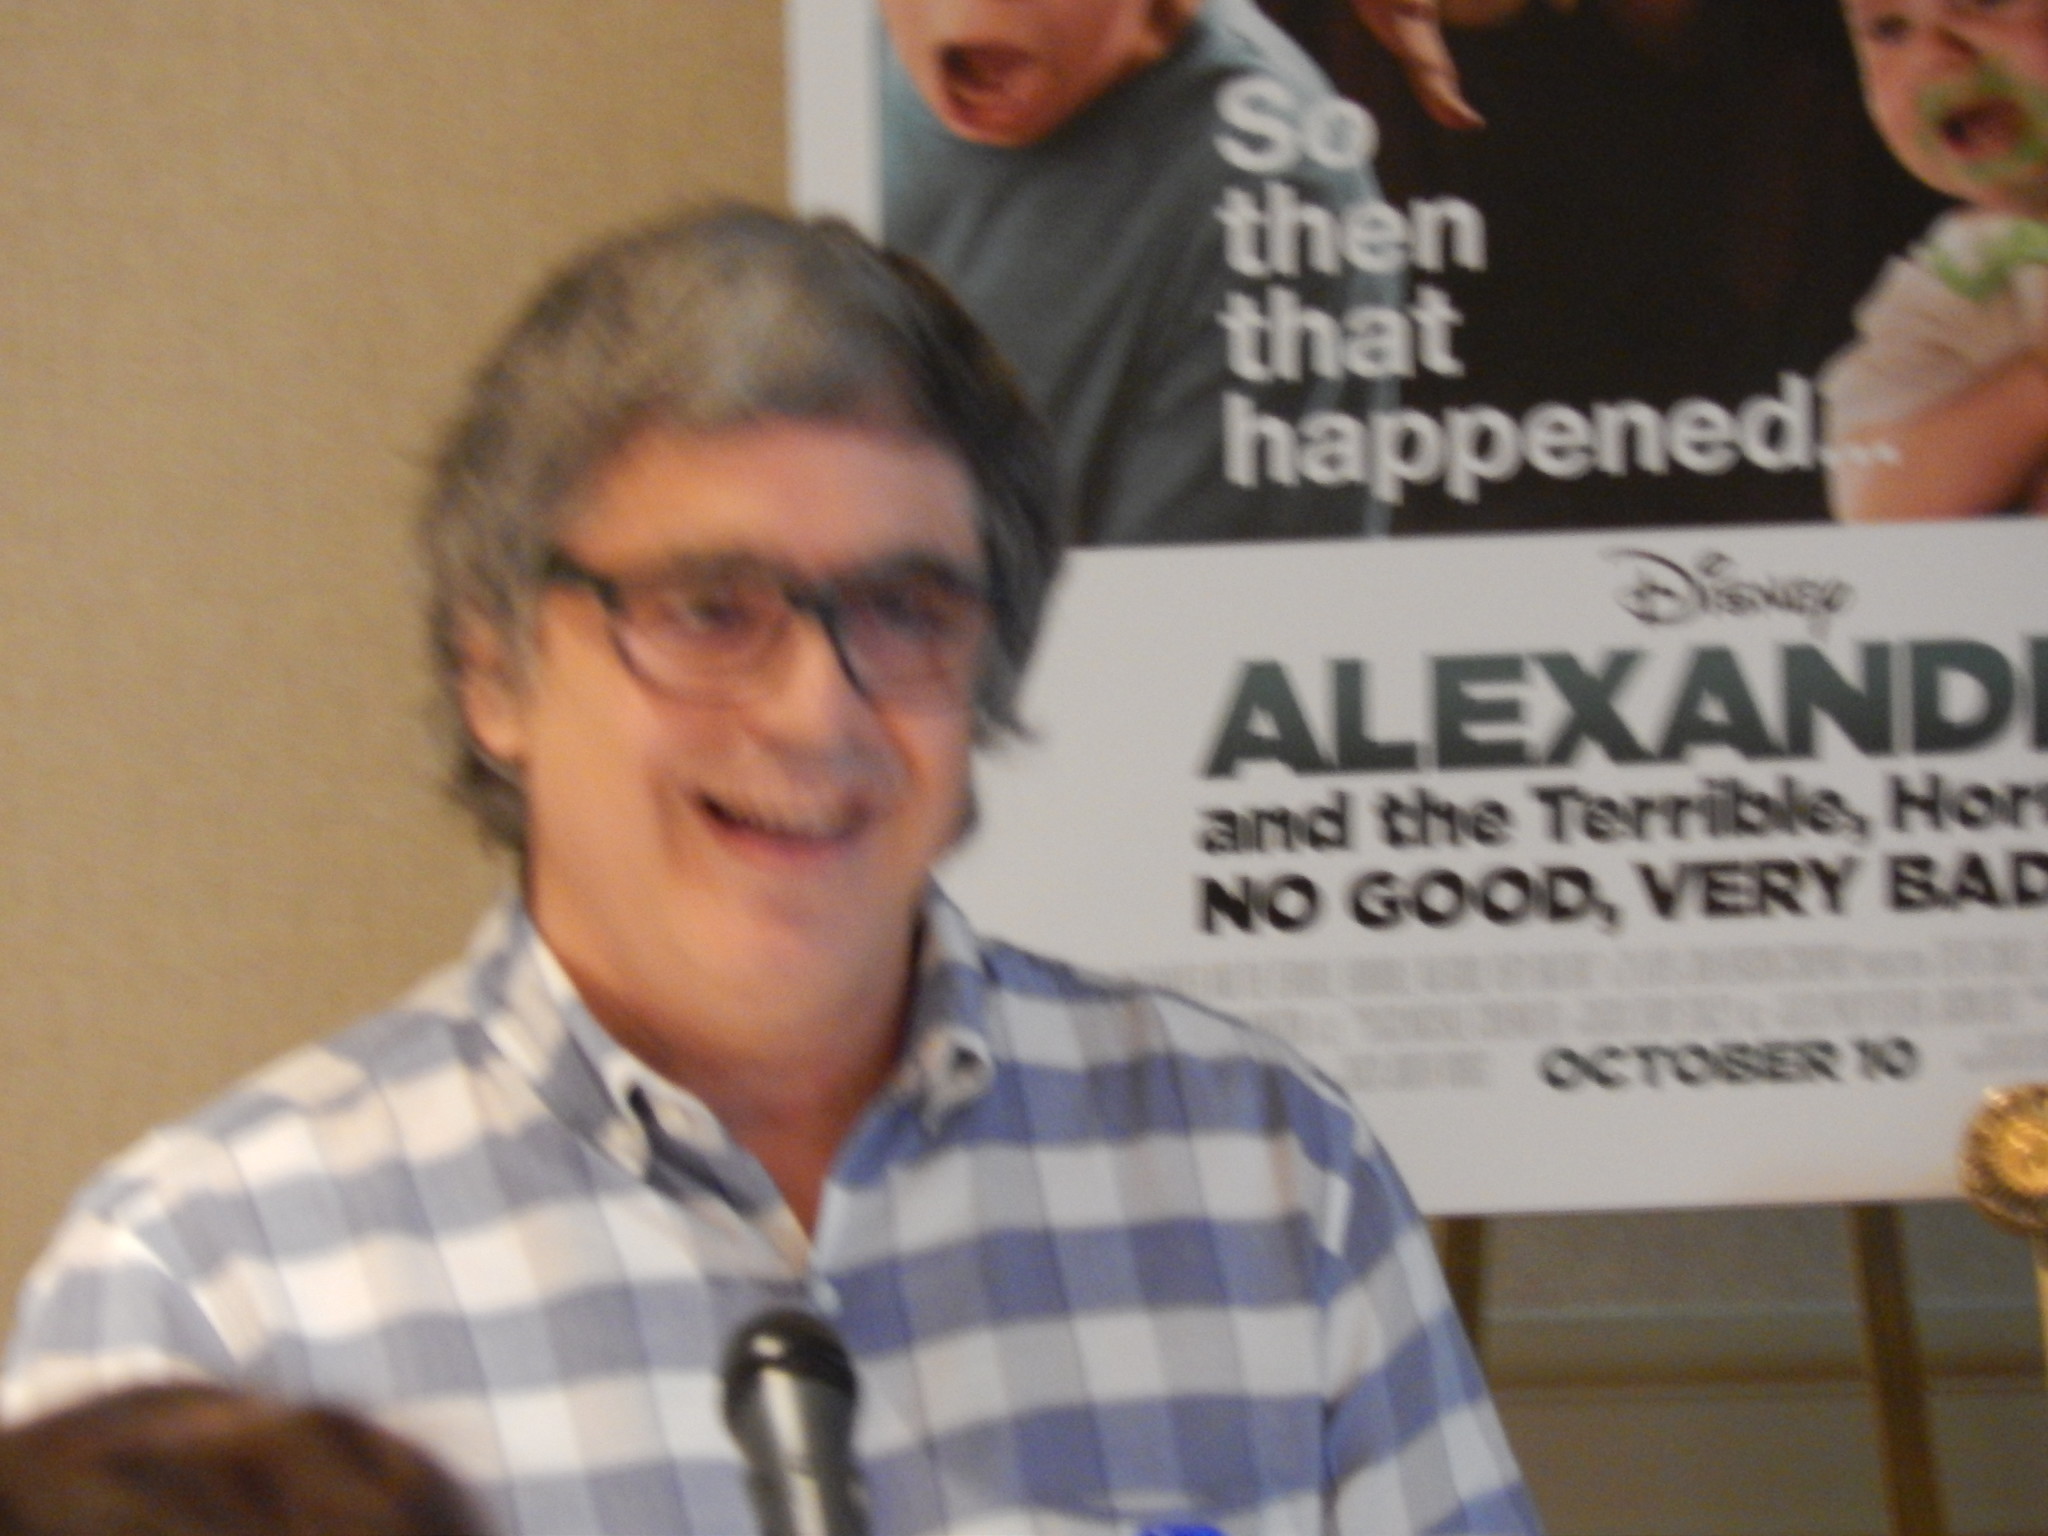 Press Conference for Alexander and the Terrible, Horrible, No Good, Very Bad Day, Part I